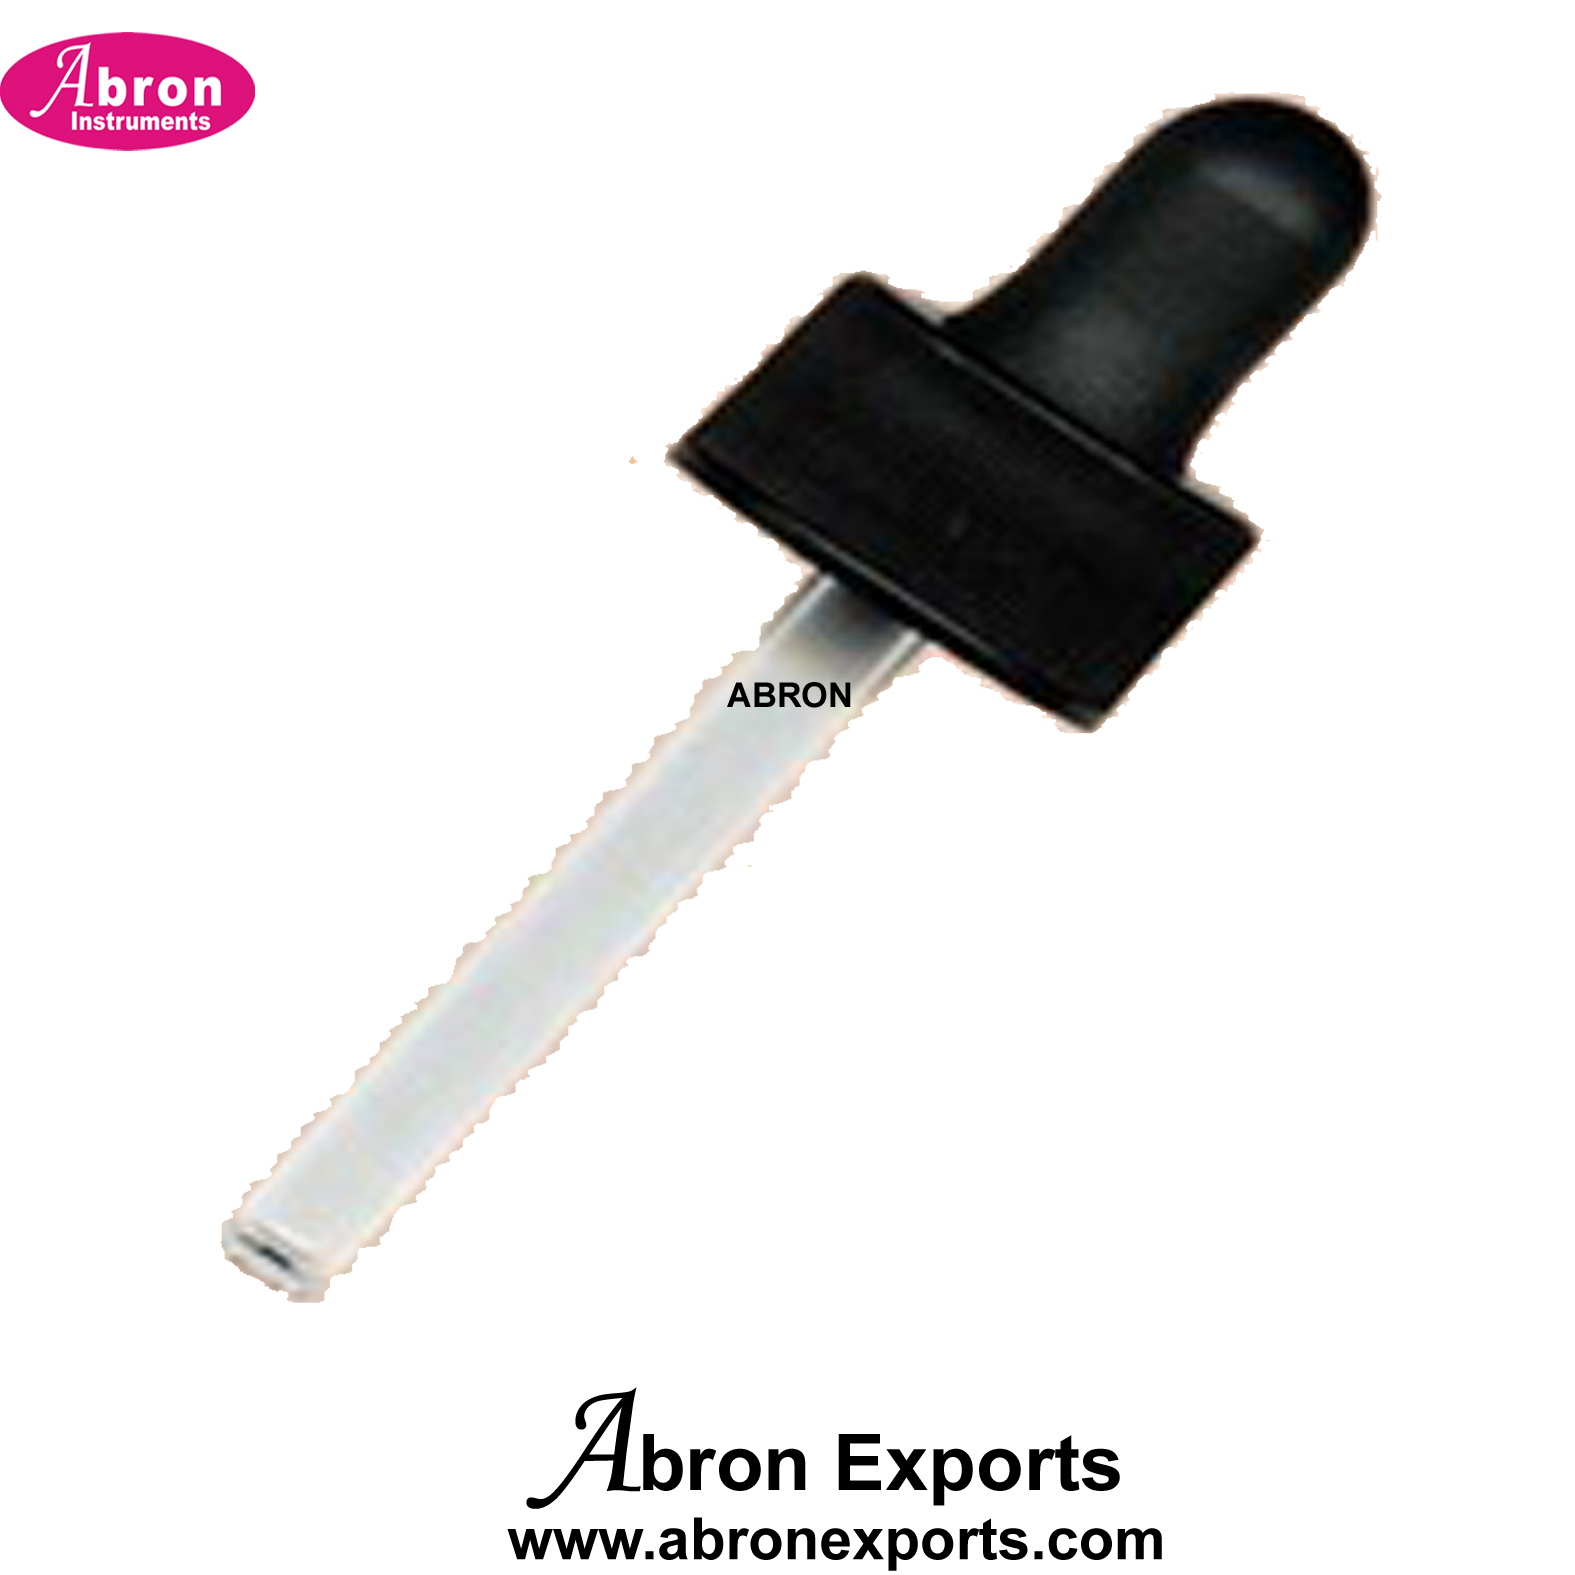 Droppers Eye Lab Use Plastic With Lines Rubber Teat 10pc Abron ABM-1528DP 